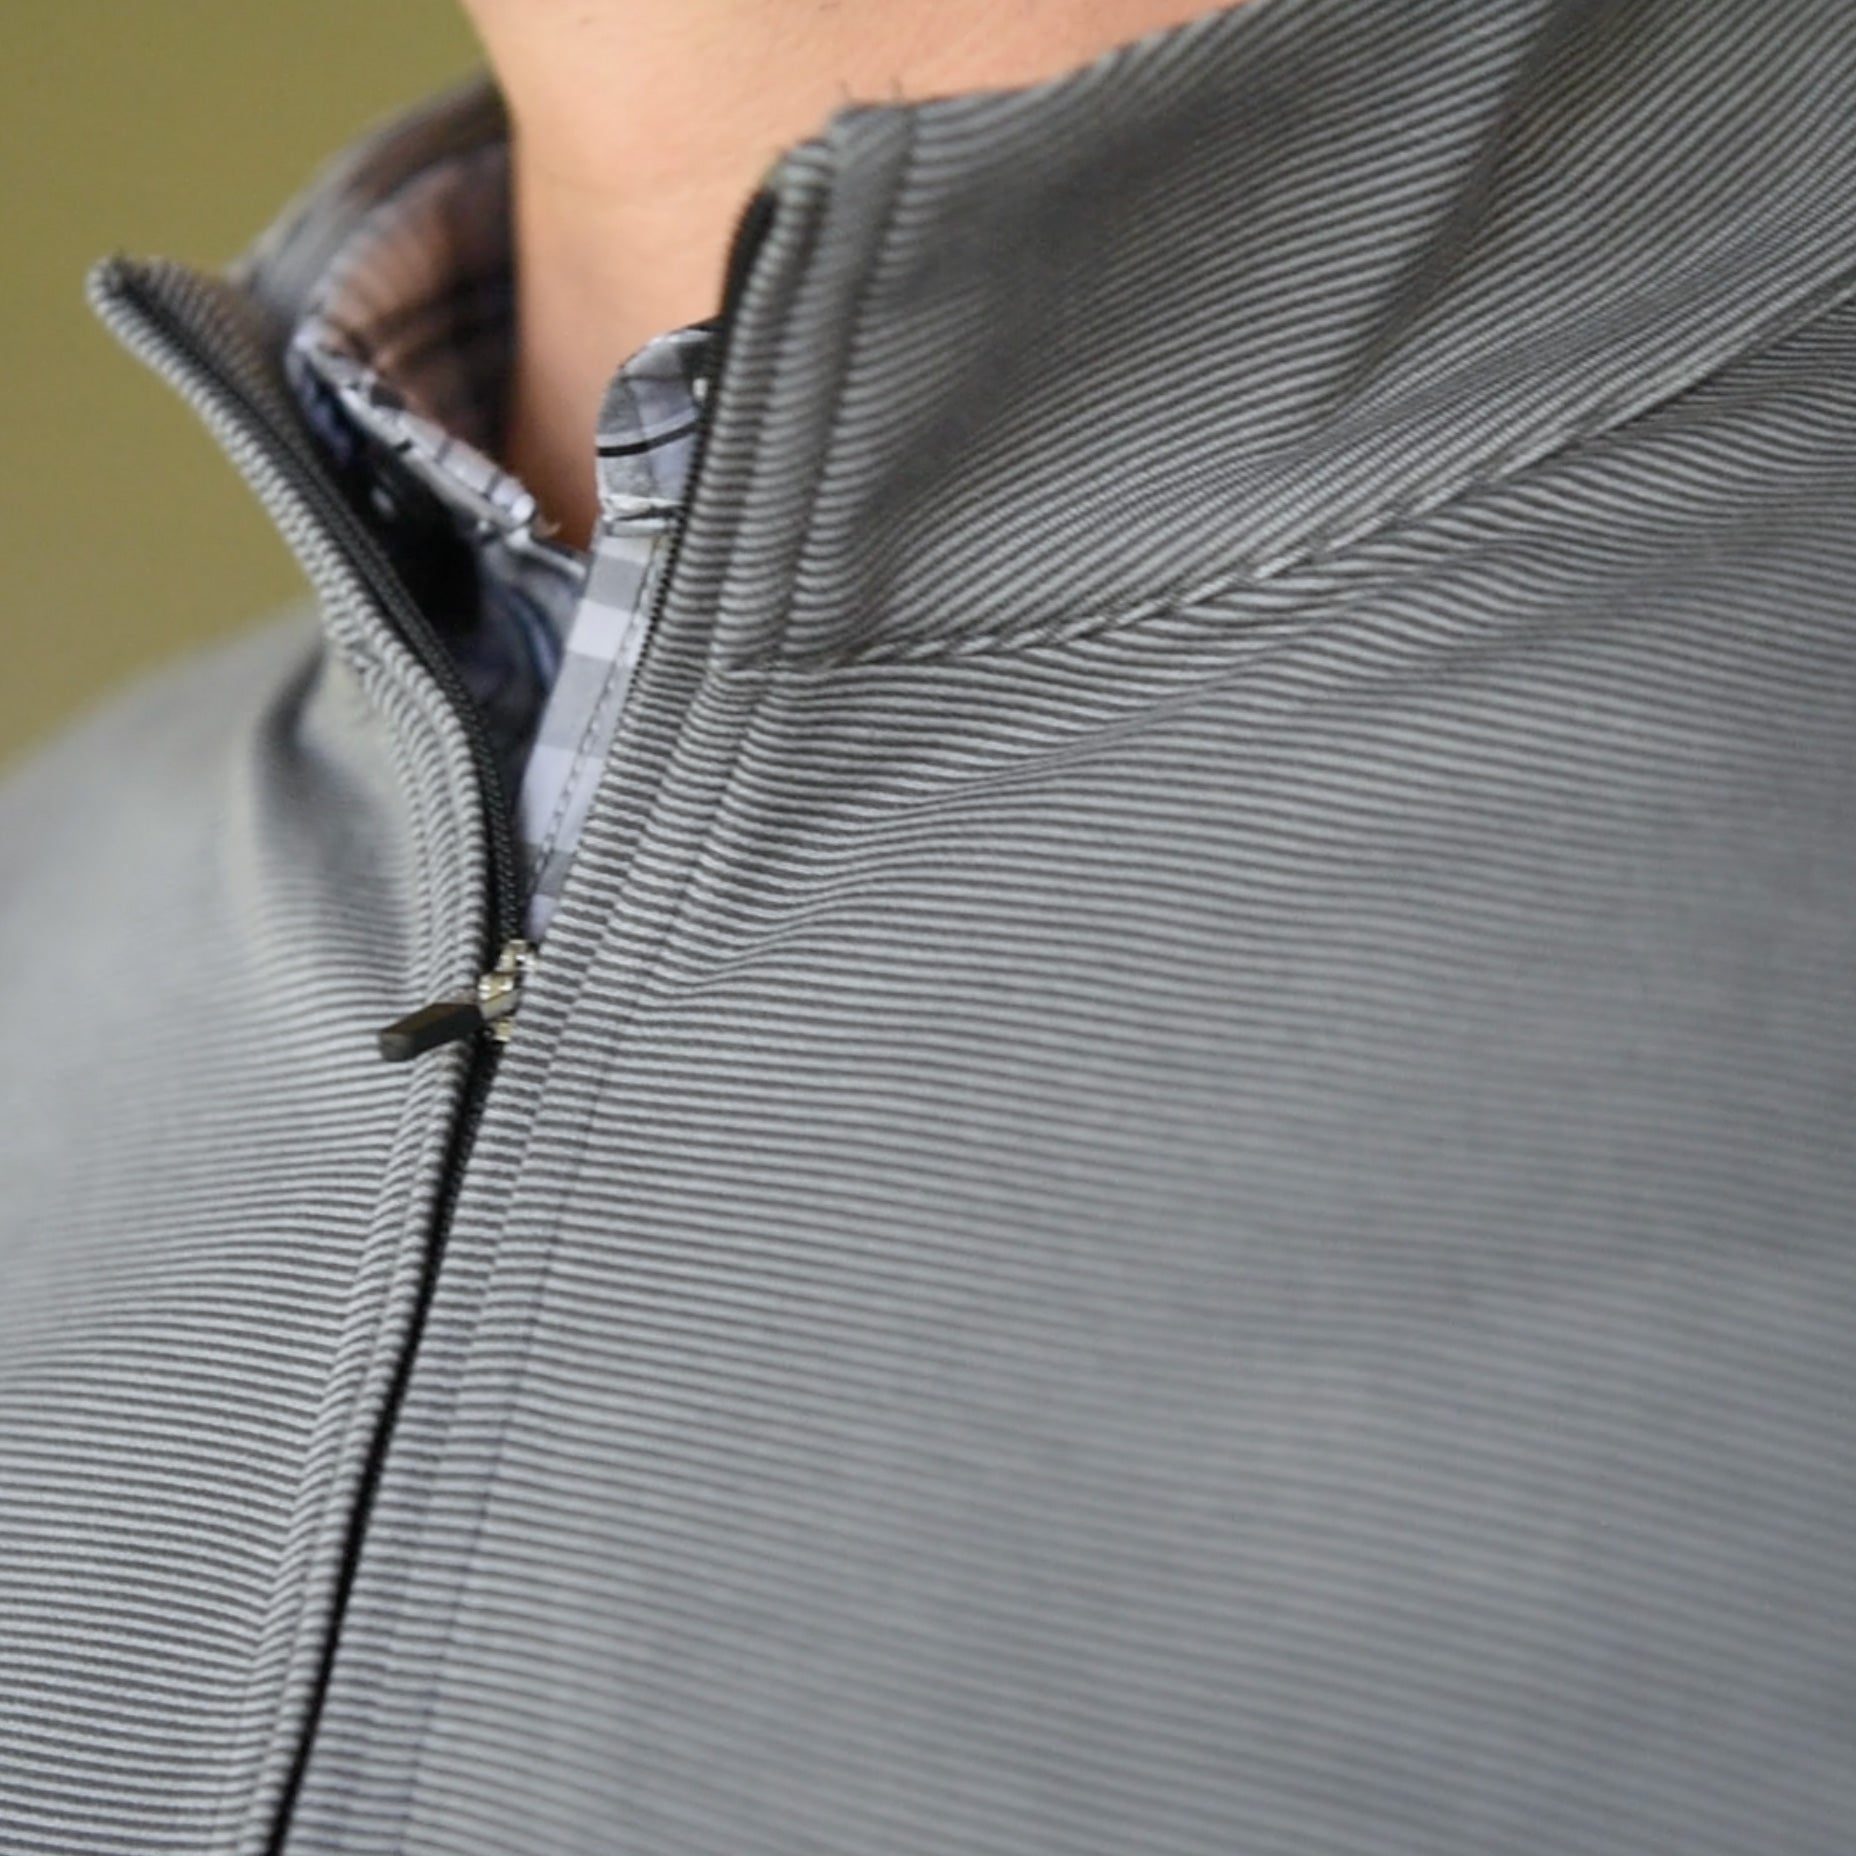 Experience the lightweight comfort of our newest quarter zips. Perfect for those cool nights and made for all your travels.  51% Acrylic / 34% Rayon / 15% Spandex  •  Quarter Zip  •  Machine Wash  •  Imported